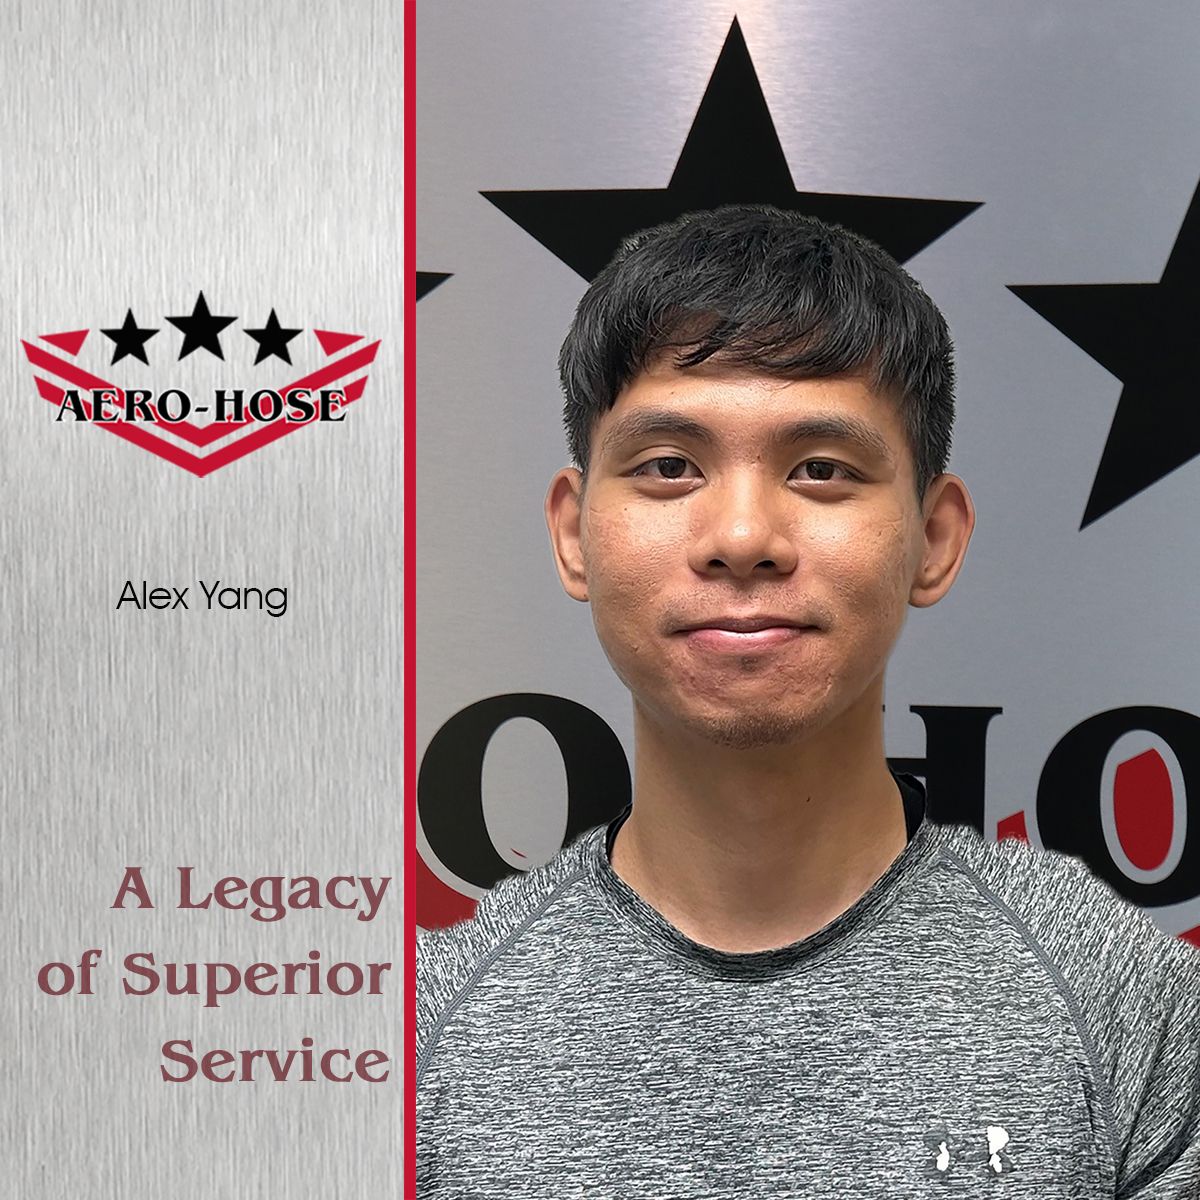 a man posing in front of a backdrop with the auto-hose logo and stars, next to a panel labeled "alex yang - a legacy of superior service".